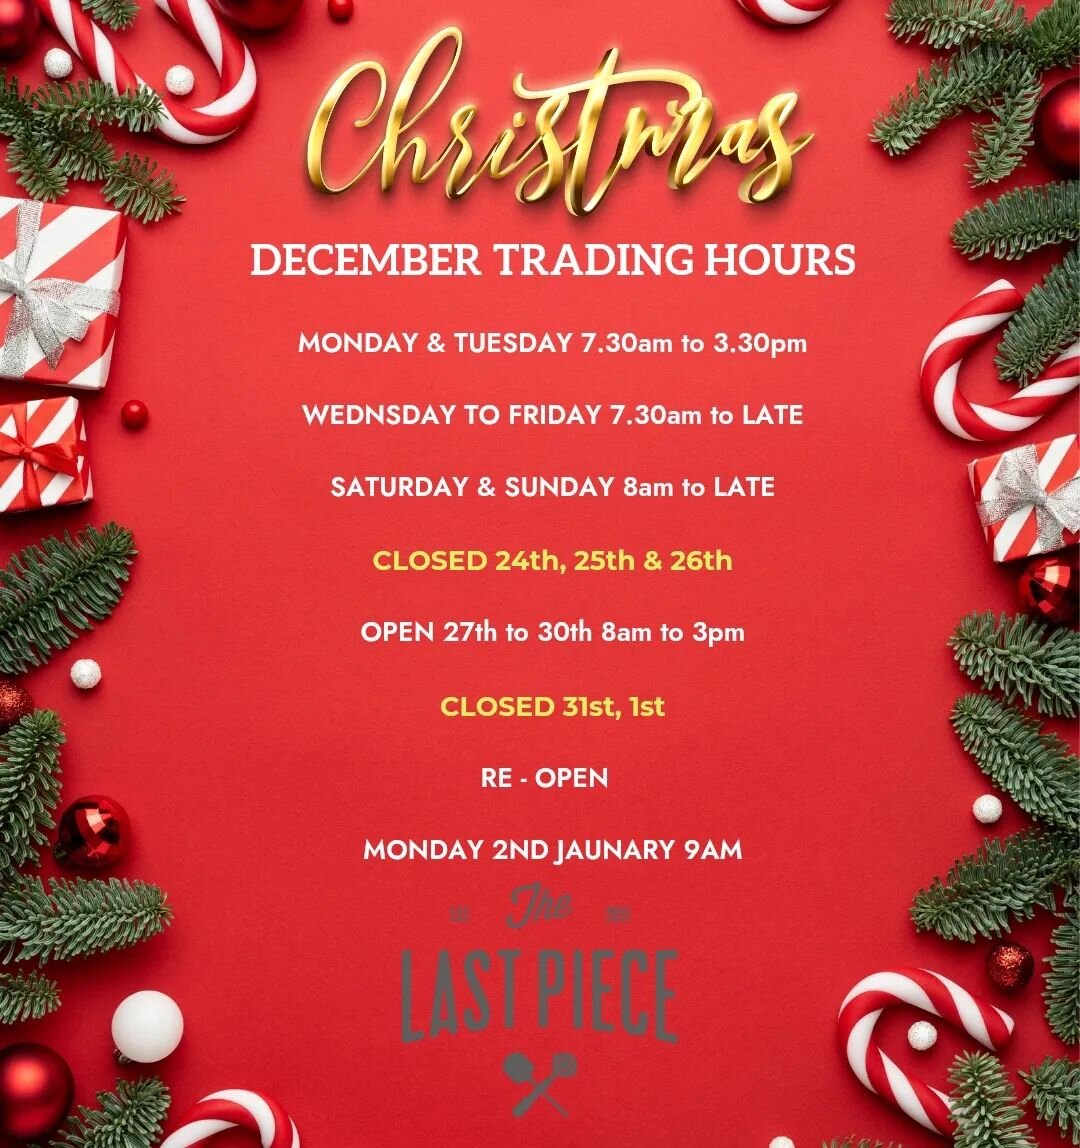 Ho ho ho...

Christmas trading hours!

We know how busy Deember can be so we have extended our hours to give you more time to catch up with loved ones!

Now open from 7.30am

Be safe, be merry, be kind, break bread and coffee and wine with loved ones